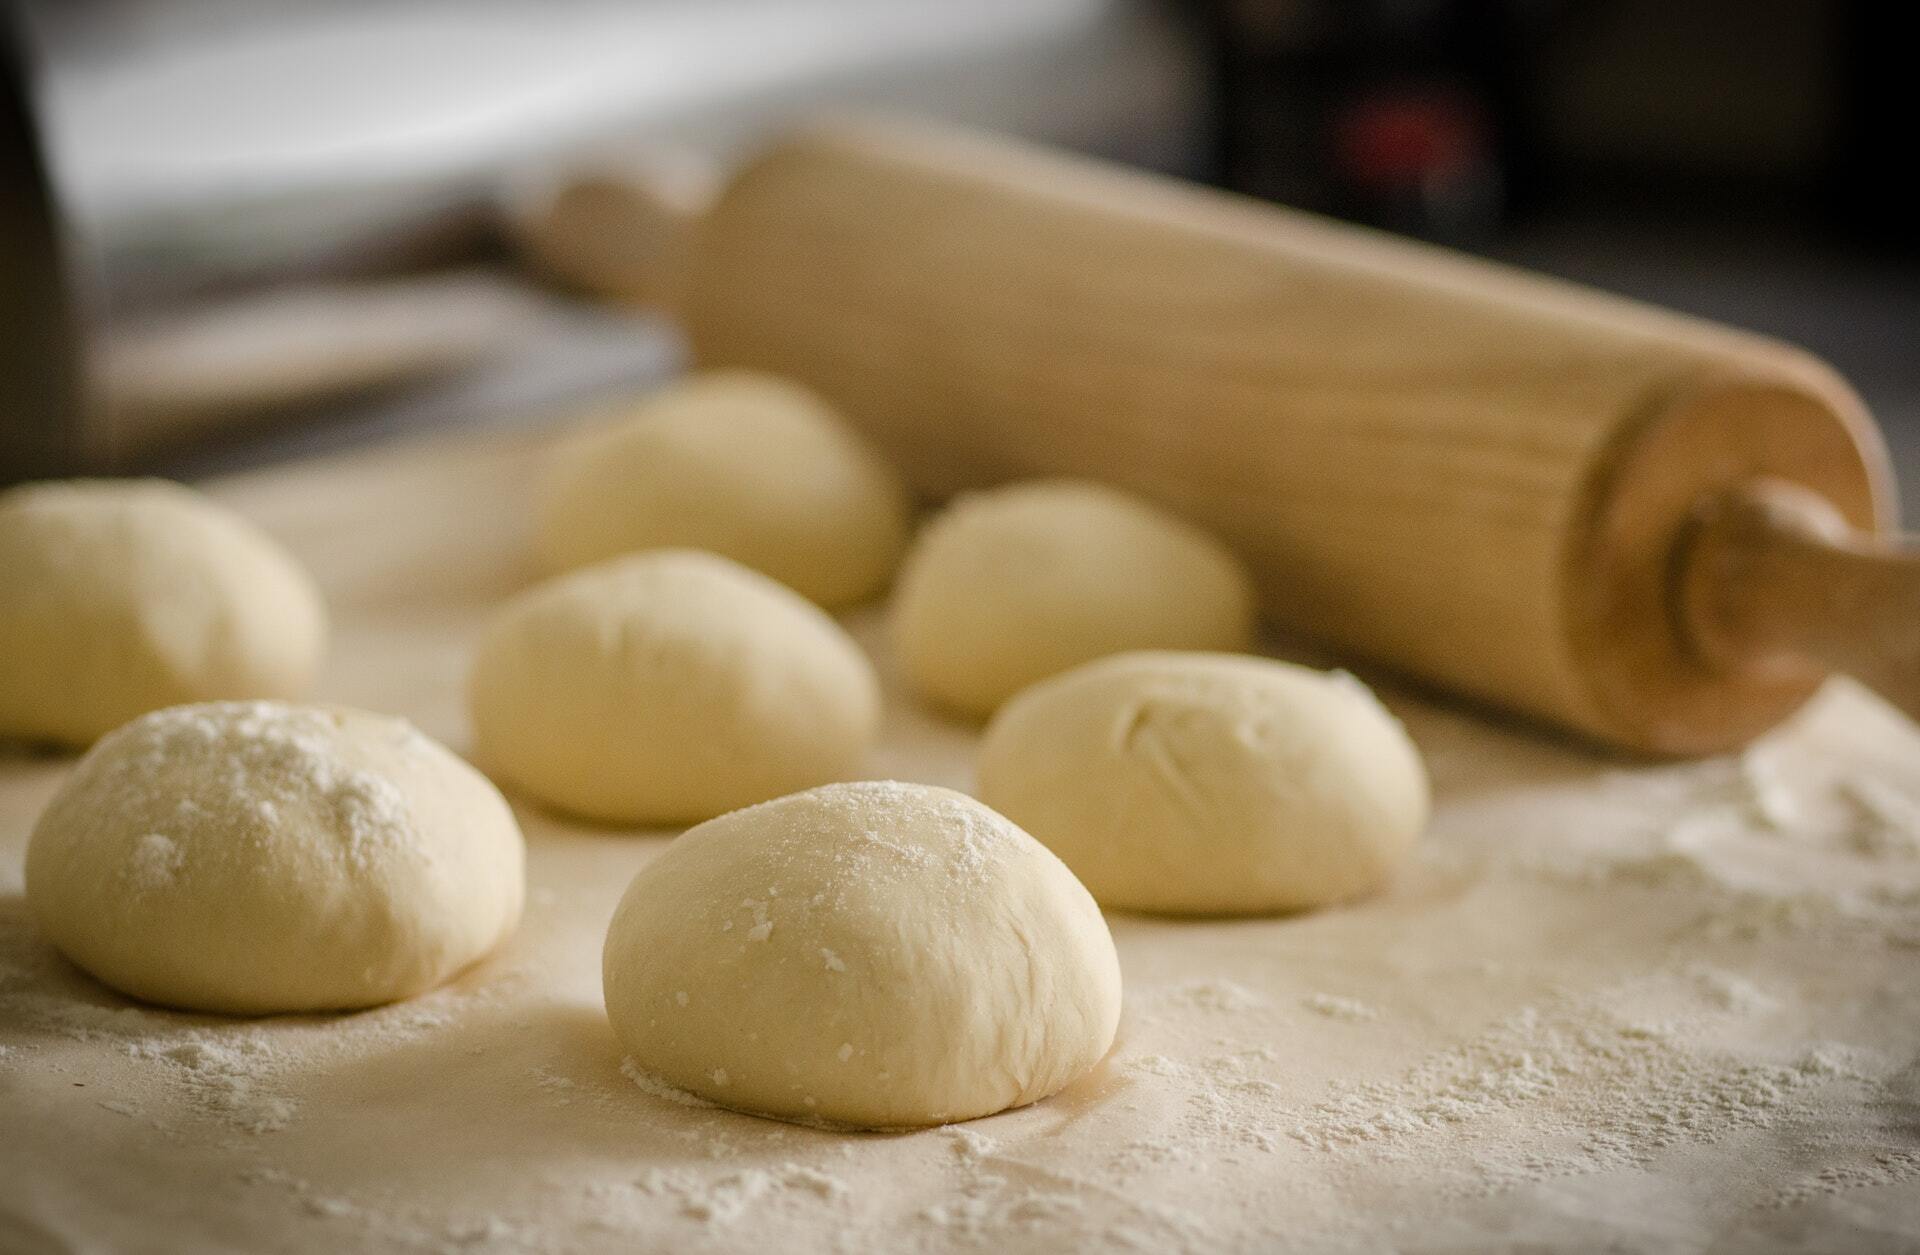 Never do this: what can ruin yeast dough